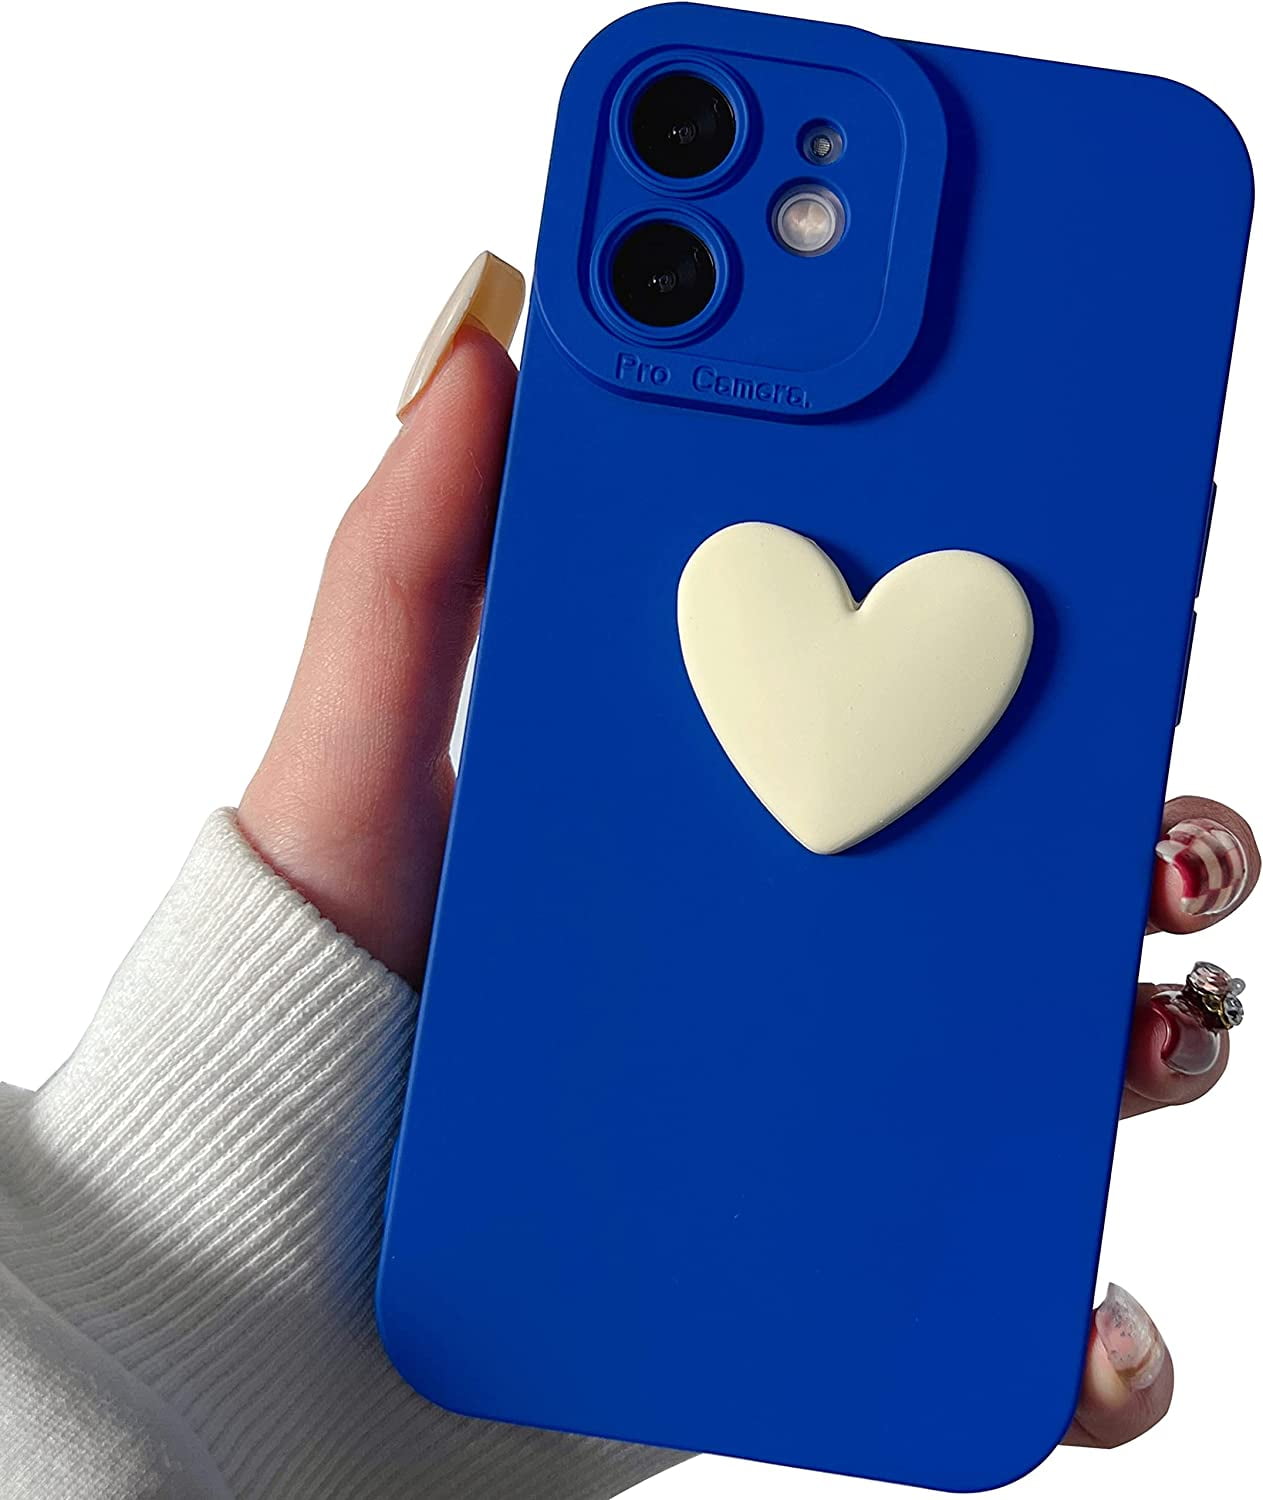 aiyaya Cute Colorful Aesthetic Phone case for iPhone 11 Case with Heart  Shaped Stand, All-Inclusive Lens Case for Women Girls - 6.1 Inch (11)